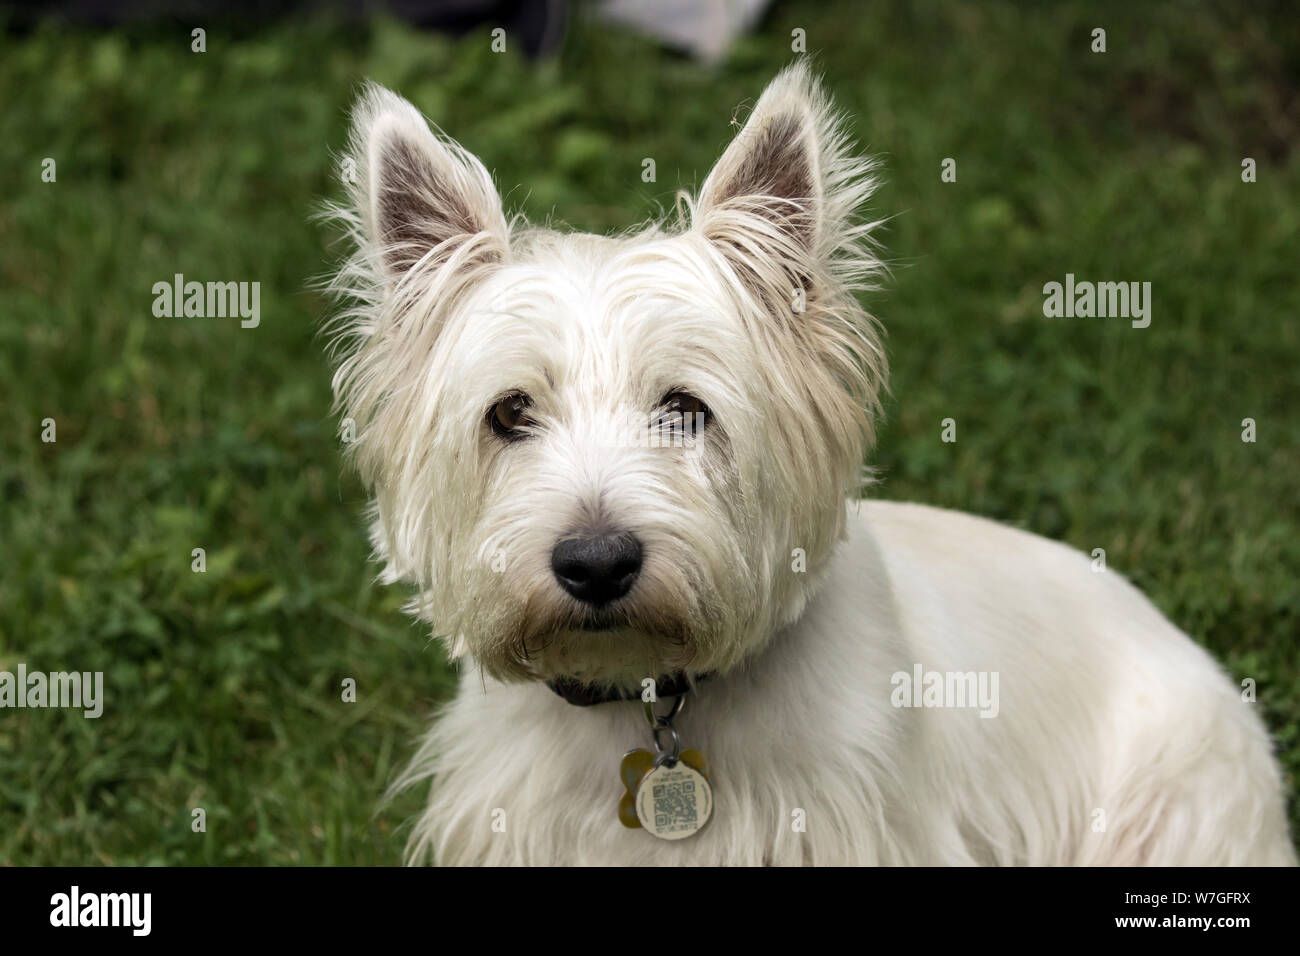 Portrait of adorable  pet dog,West Highland White Terrier looking at camera.Background is grass green. Stock Photo